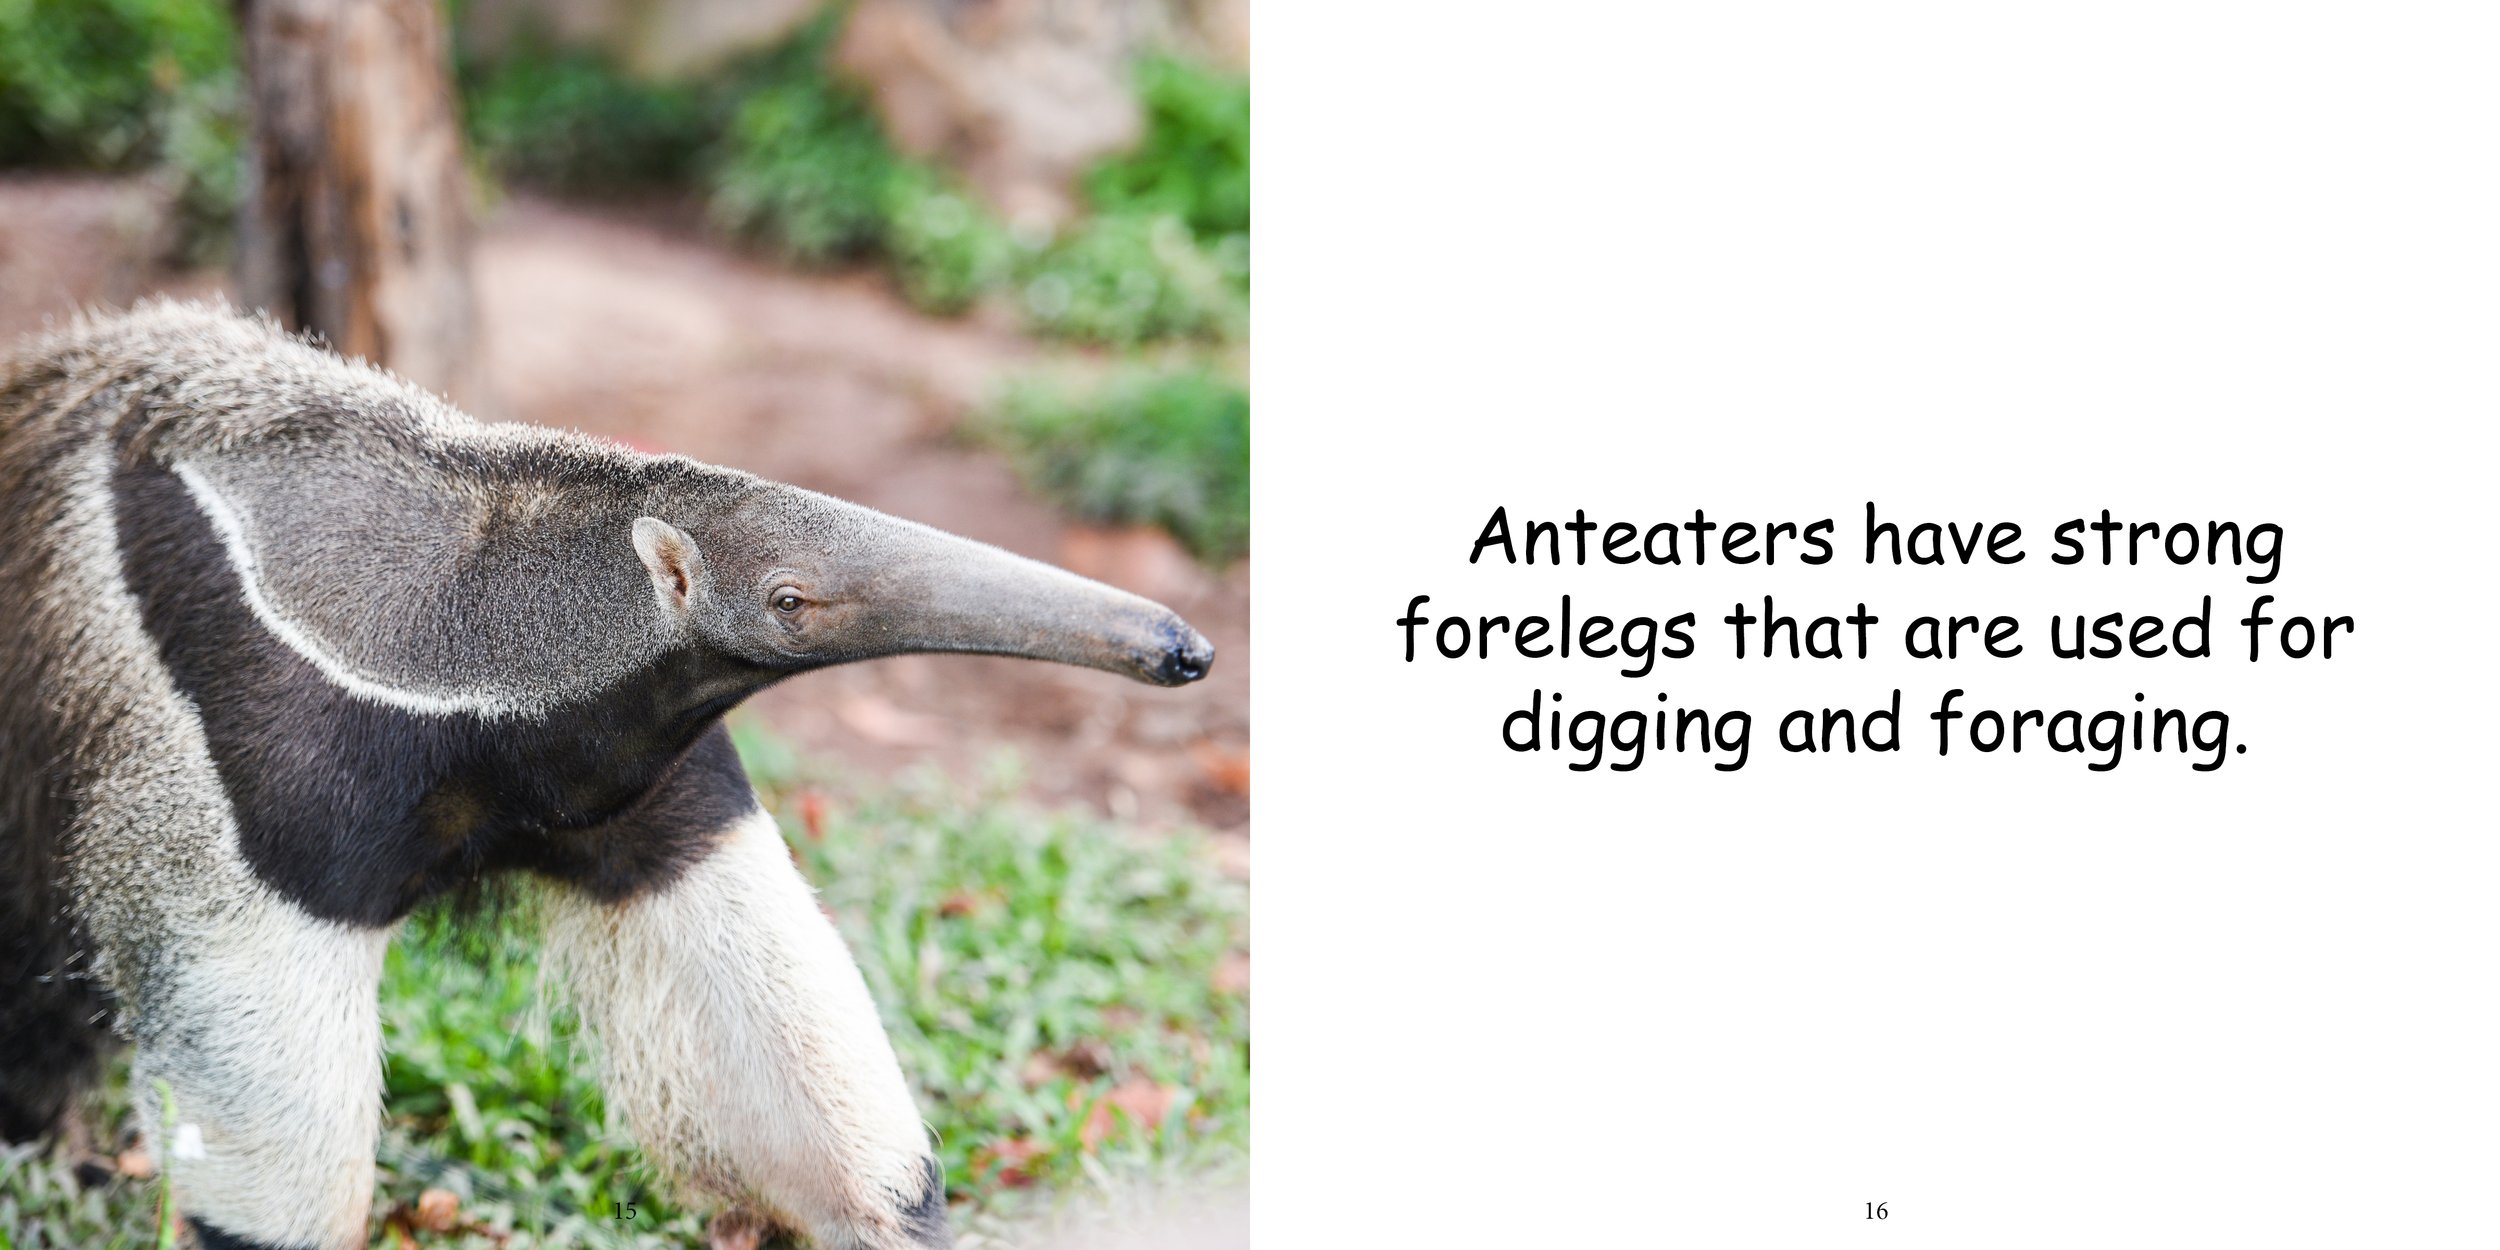 Everything about Anteaters12.jpg